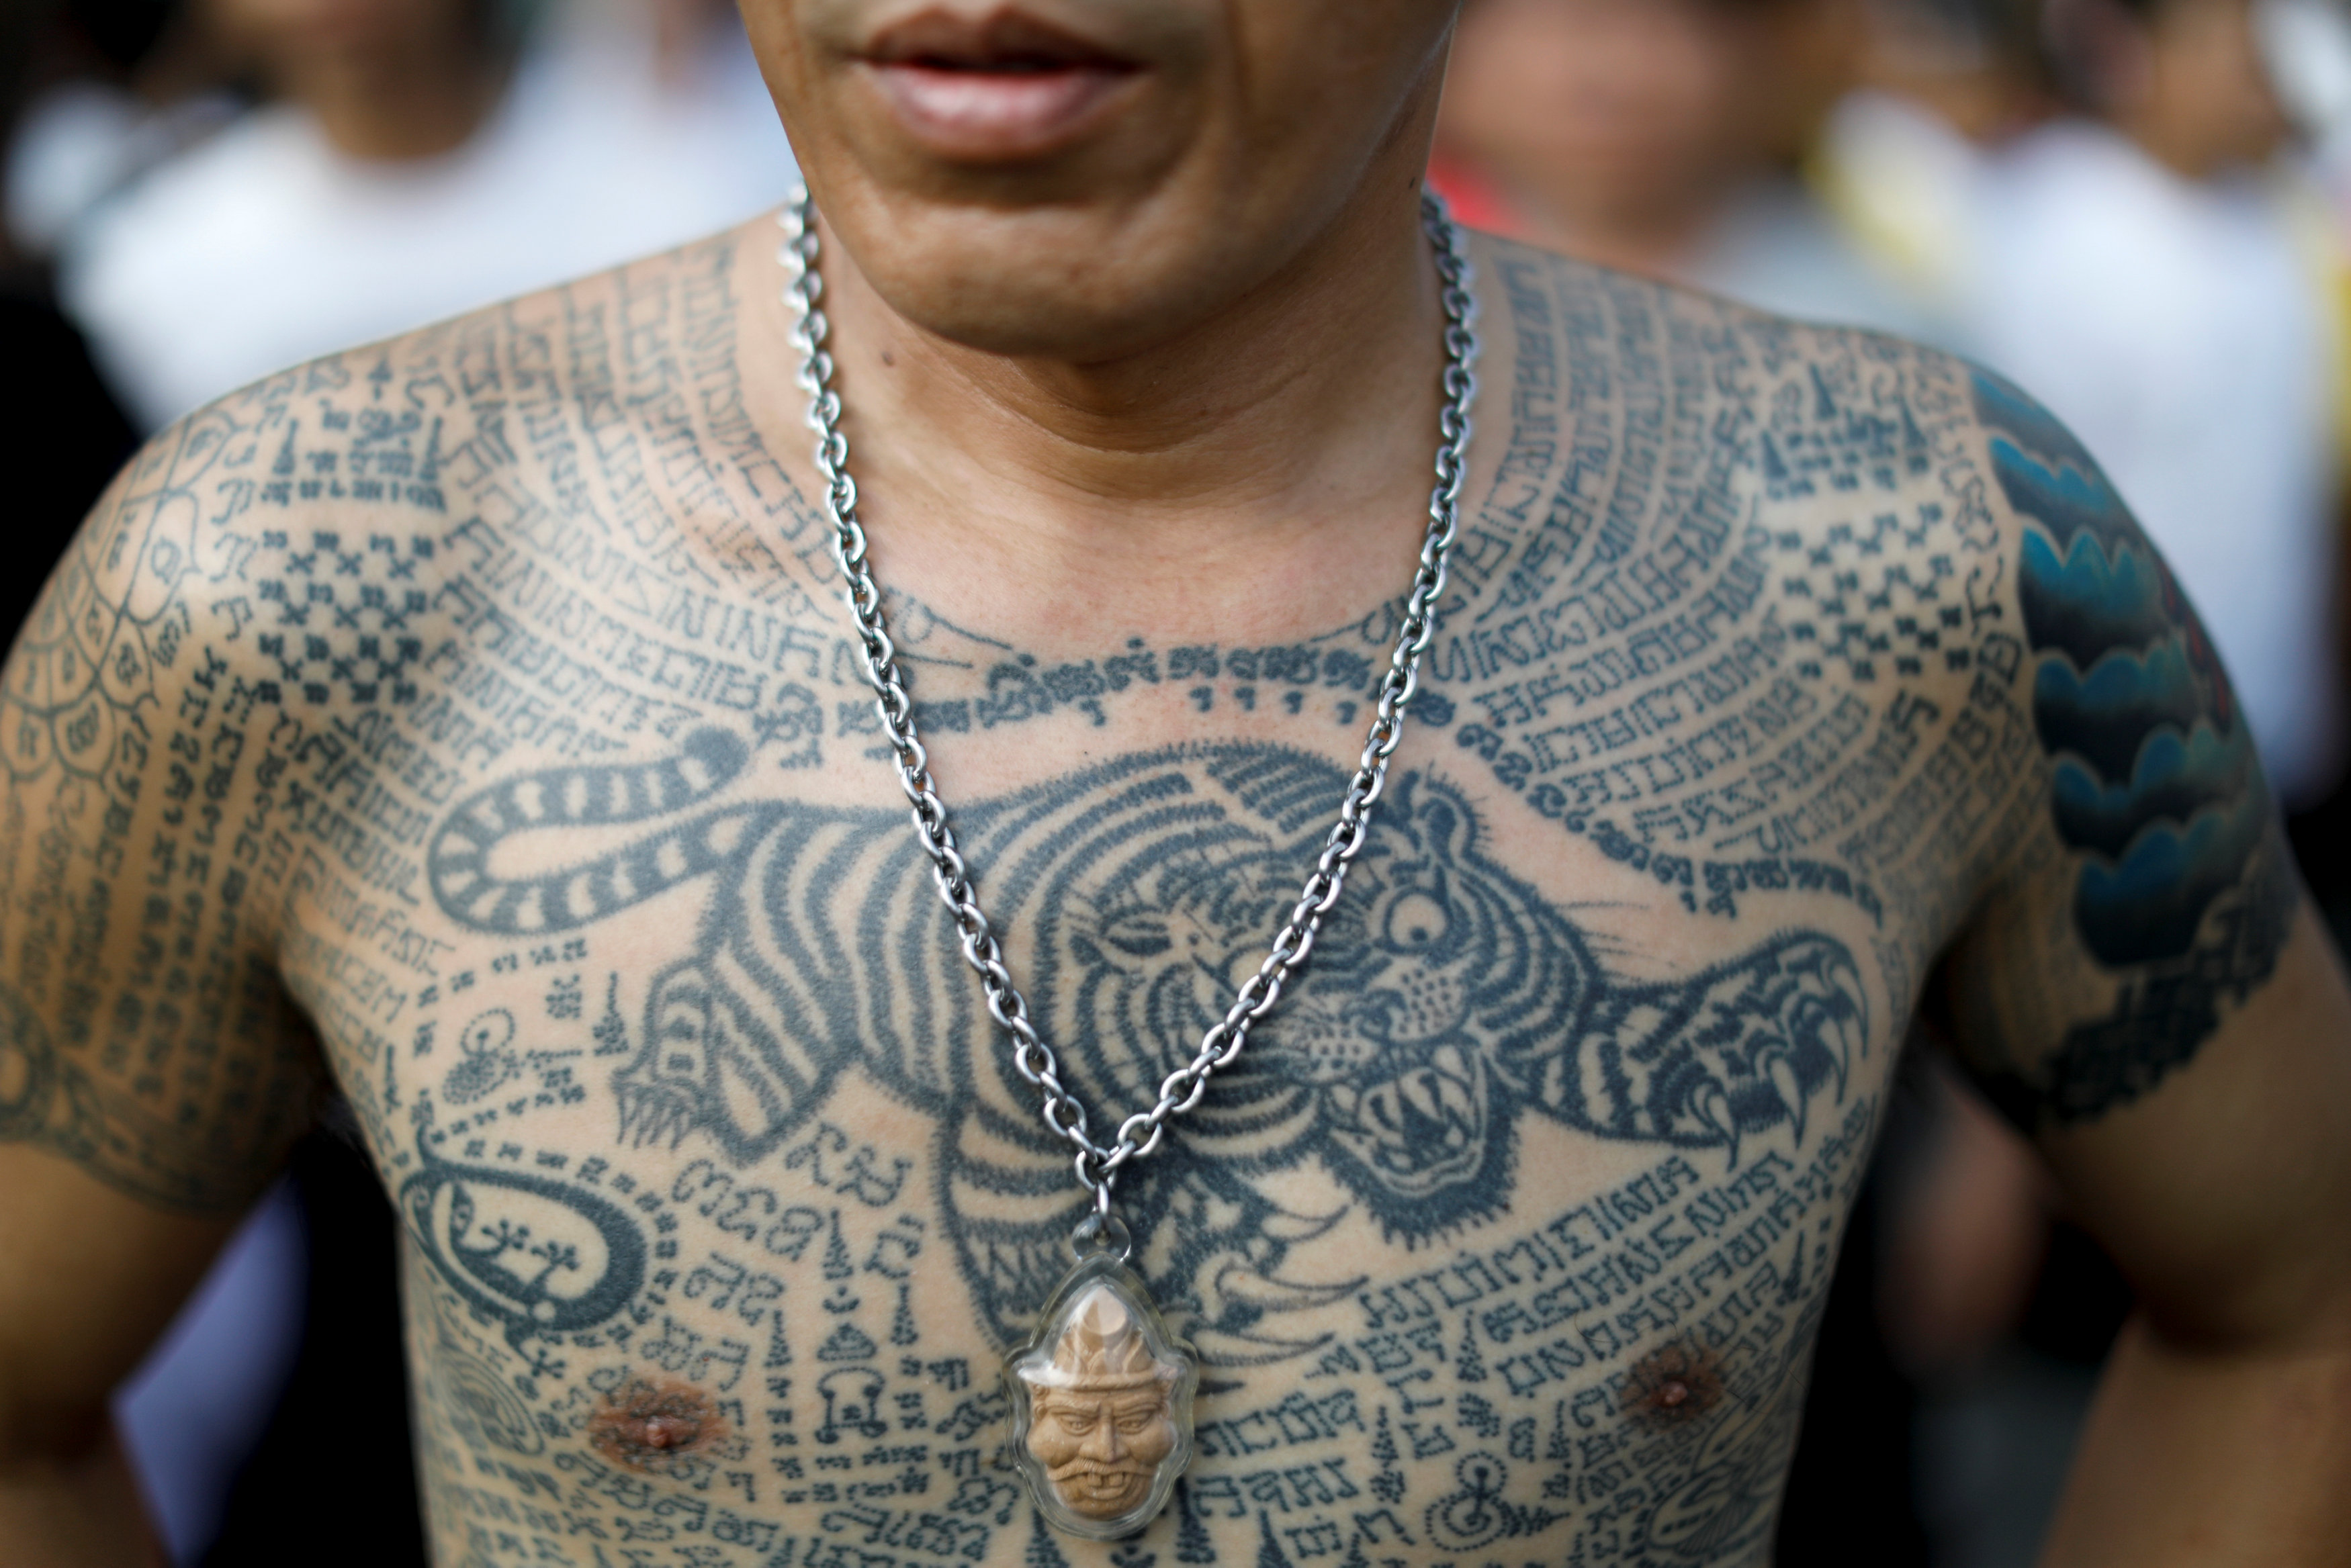 A devotee attends the religious tattoo festival at Wat Bang Phra, where they come to recharge the power of their sacred tattoos, in Nakhon Pathom province, Thailand, March 11, 2017. REUTERS/Jorge Silva